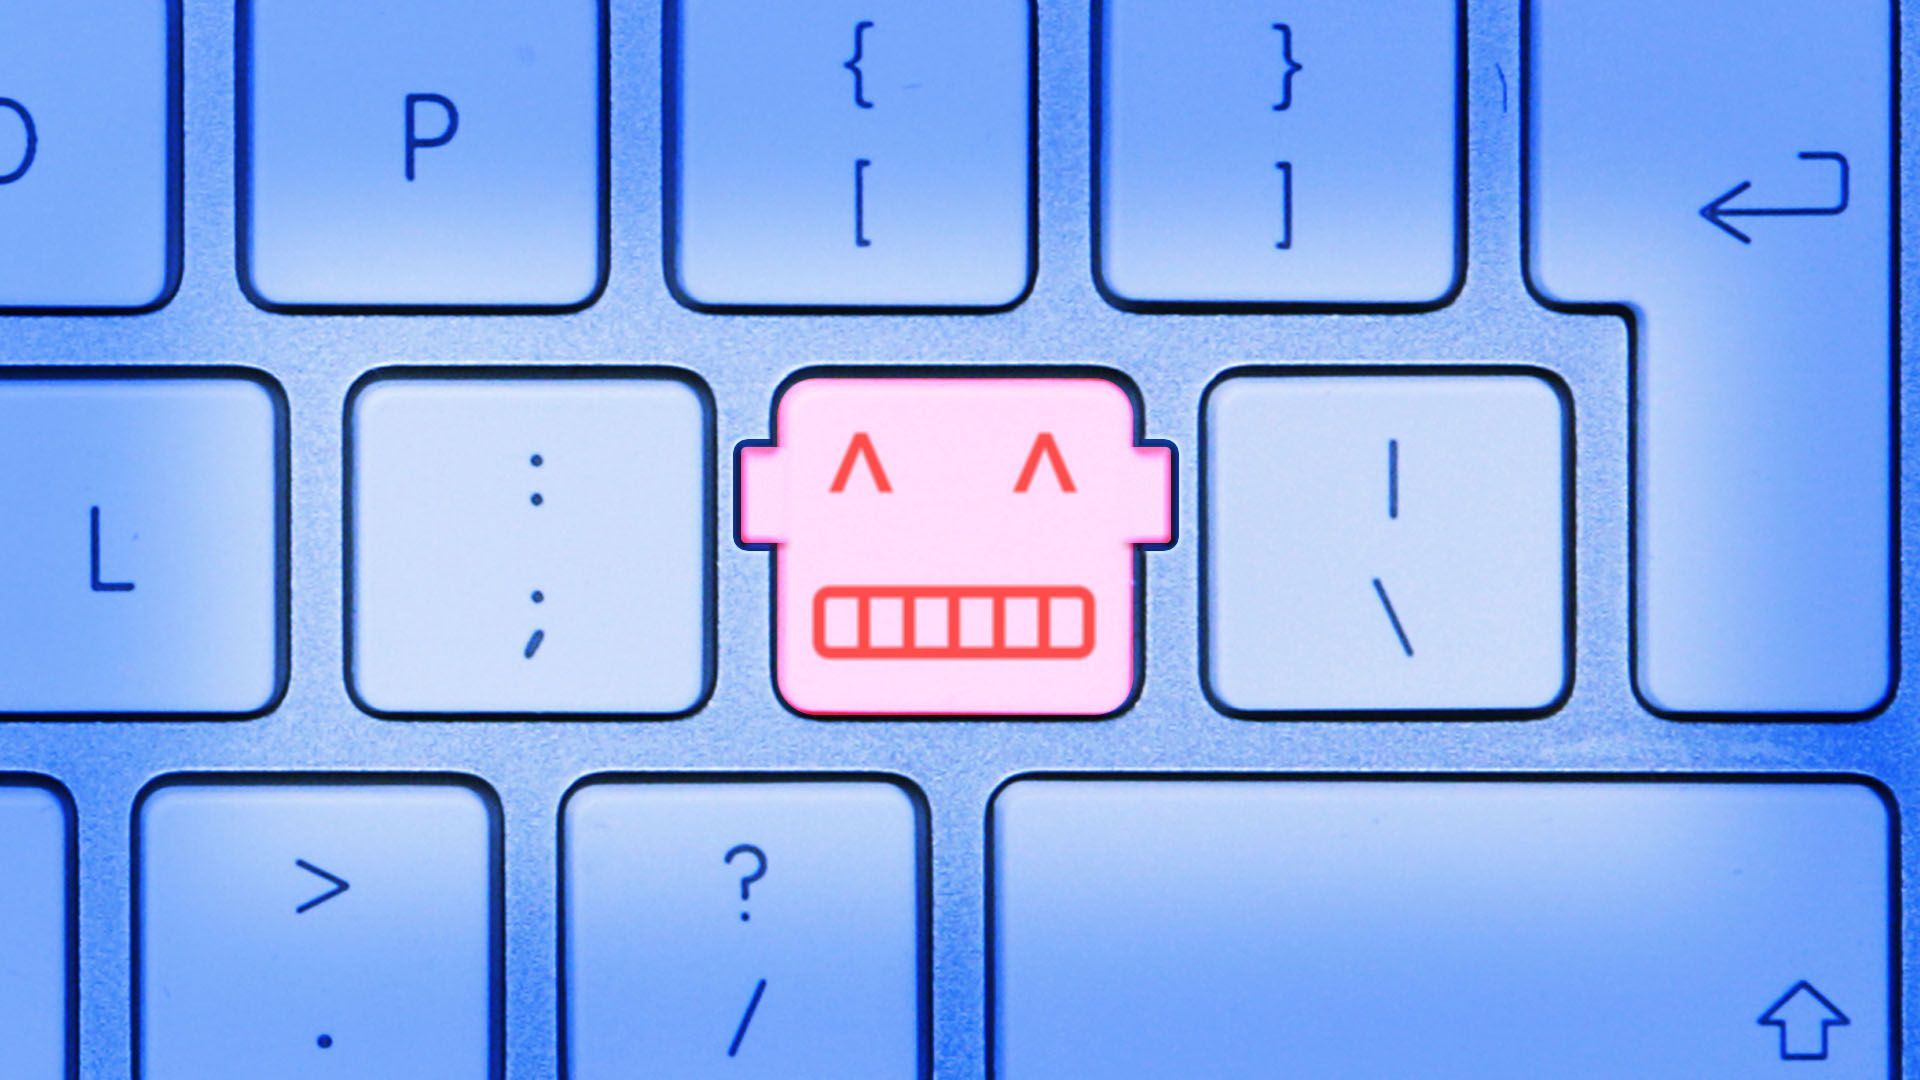 Illustration of a keyboard with a robot-shaped key in the middle